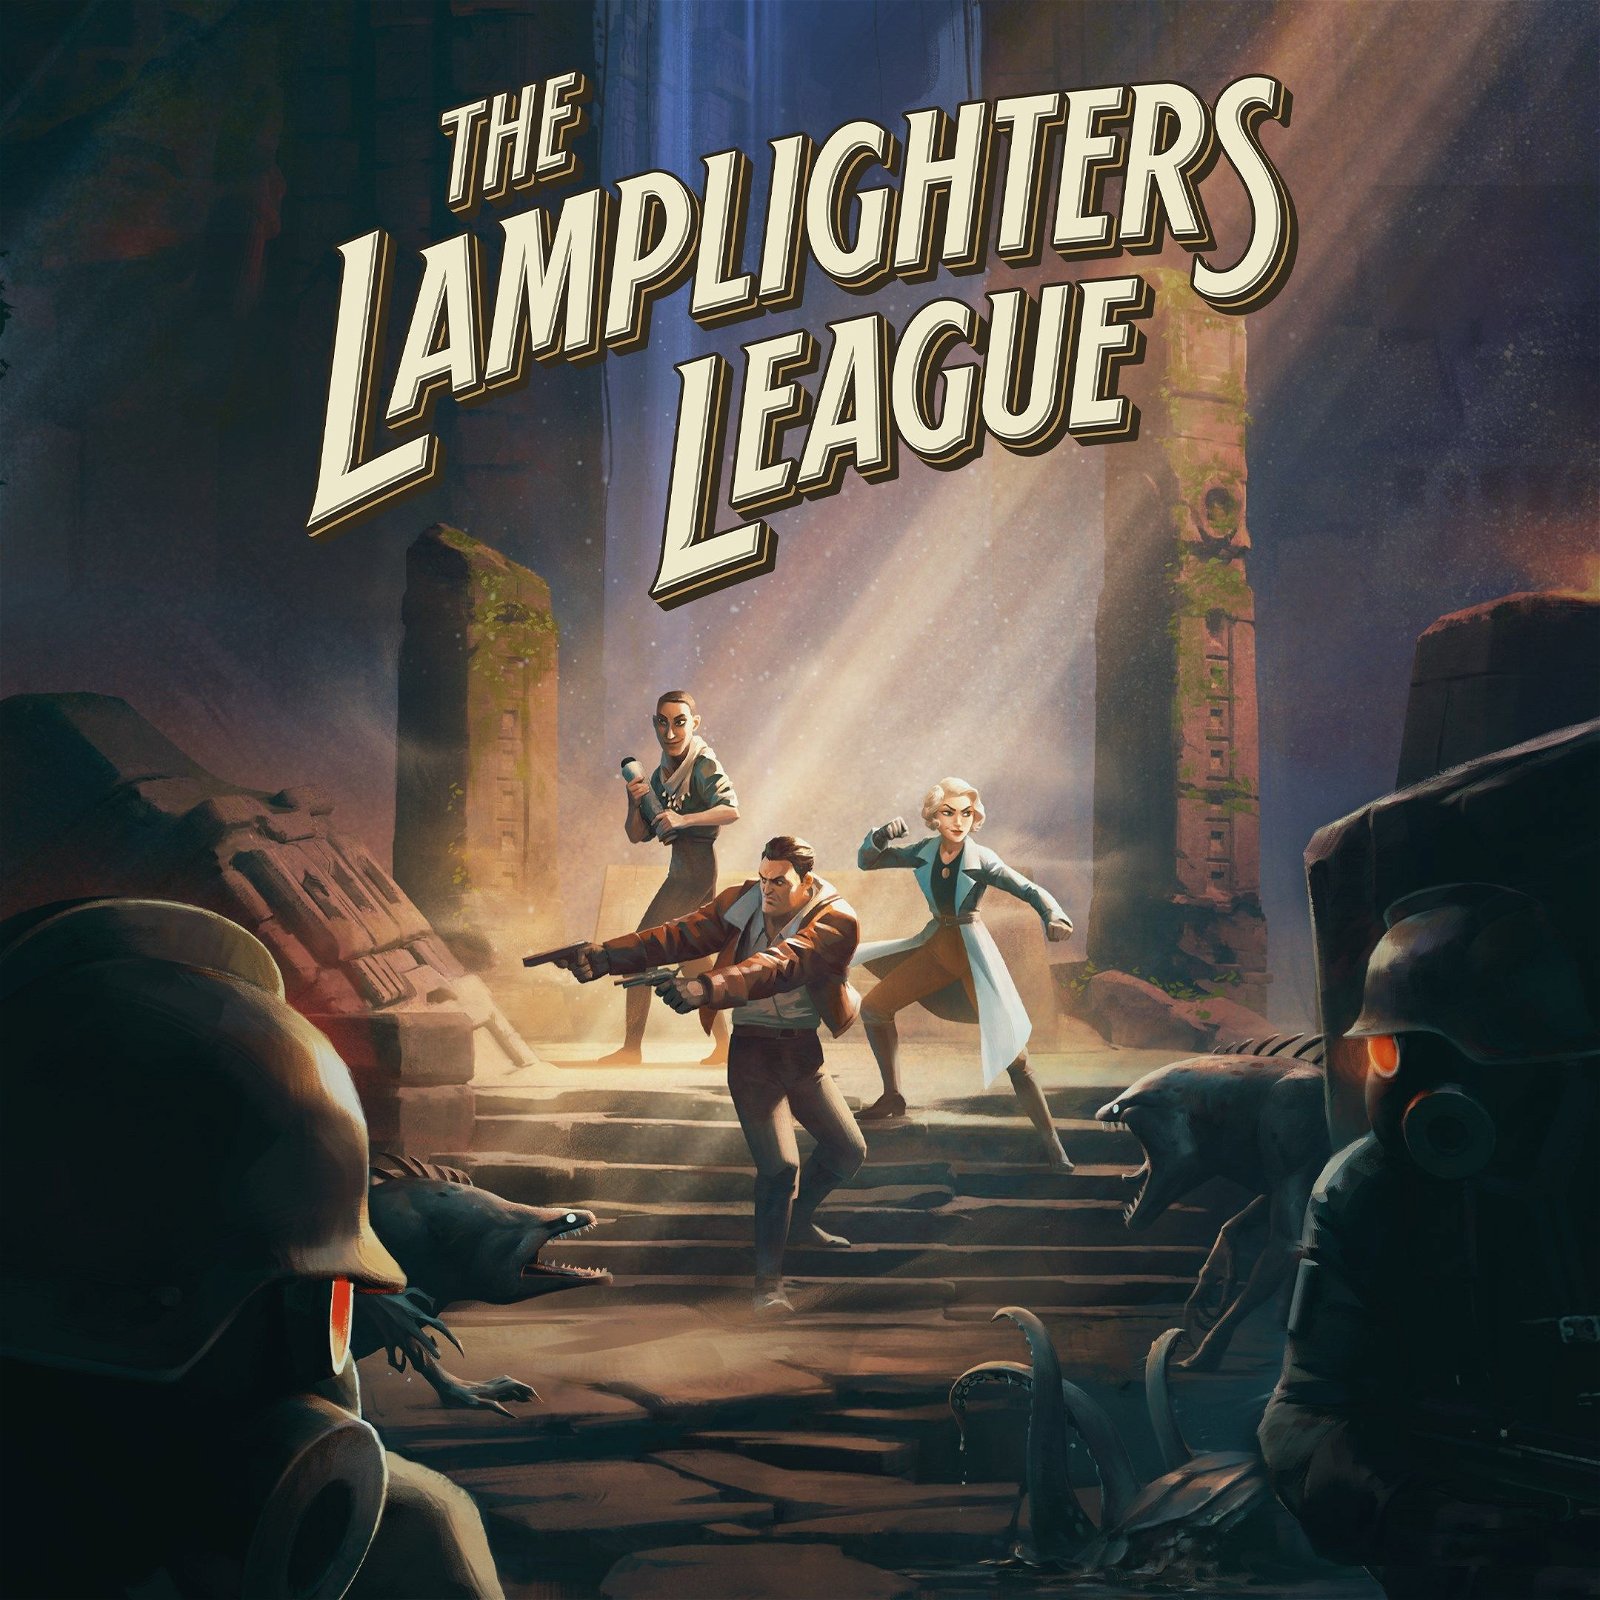 Image of The Lamplighters League